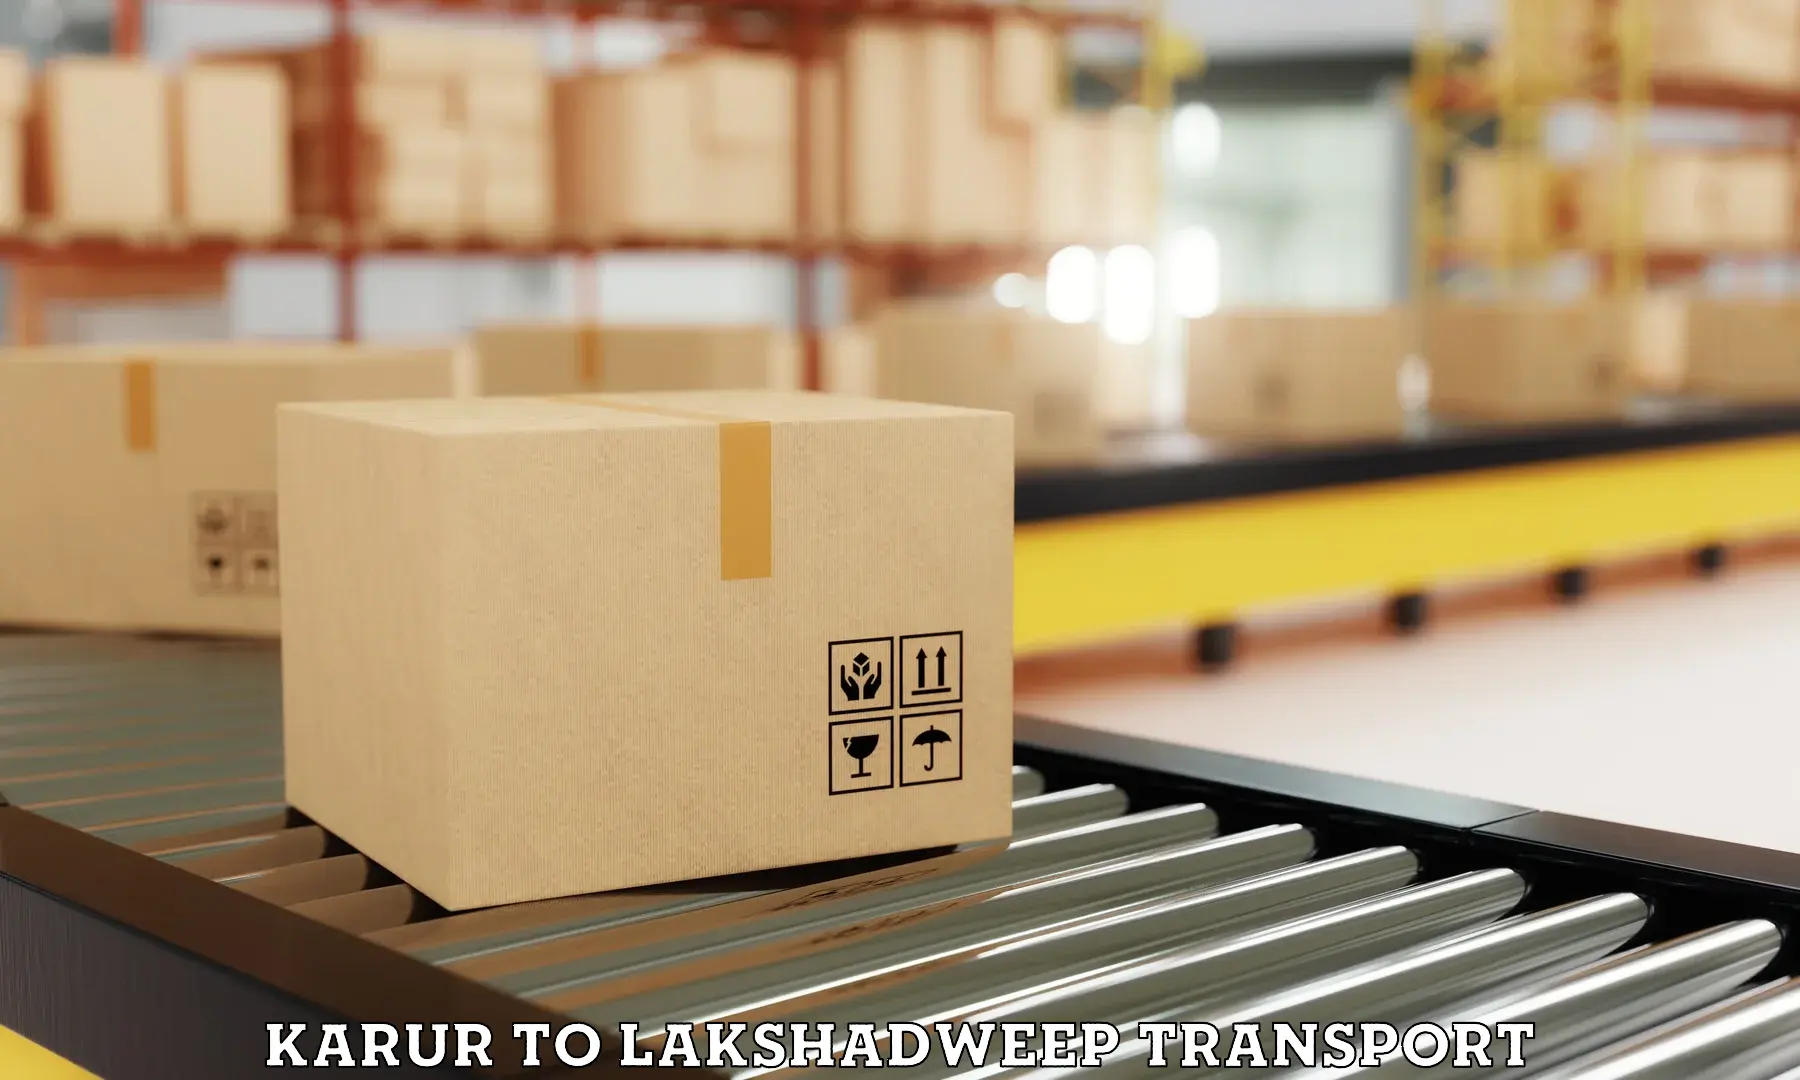 Container transport service Karur to Lakshadweep